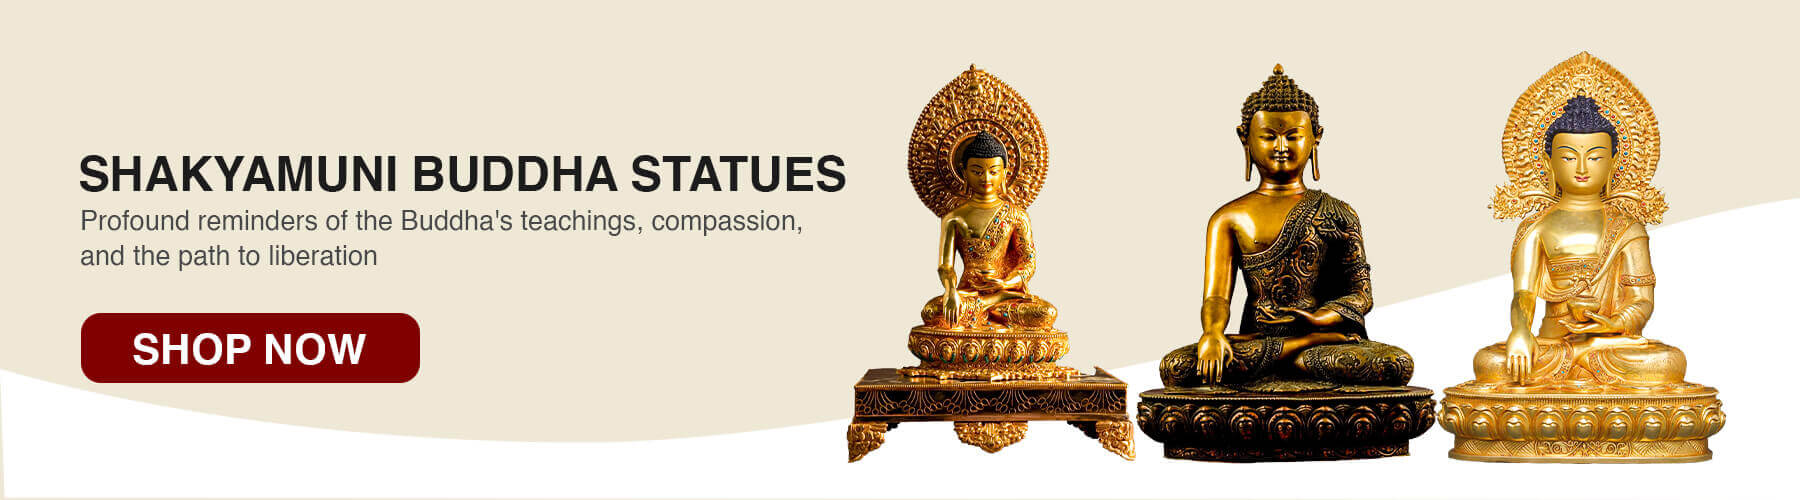 Significance of Buddha statues in Buddhist style and tradition